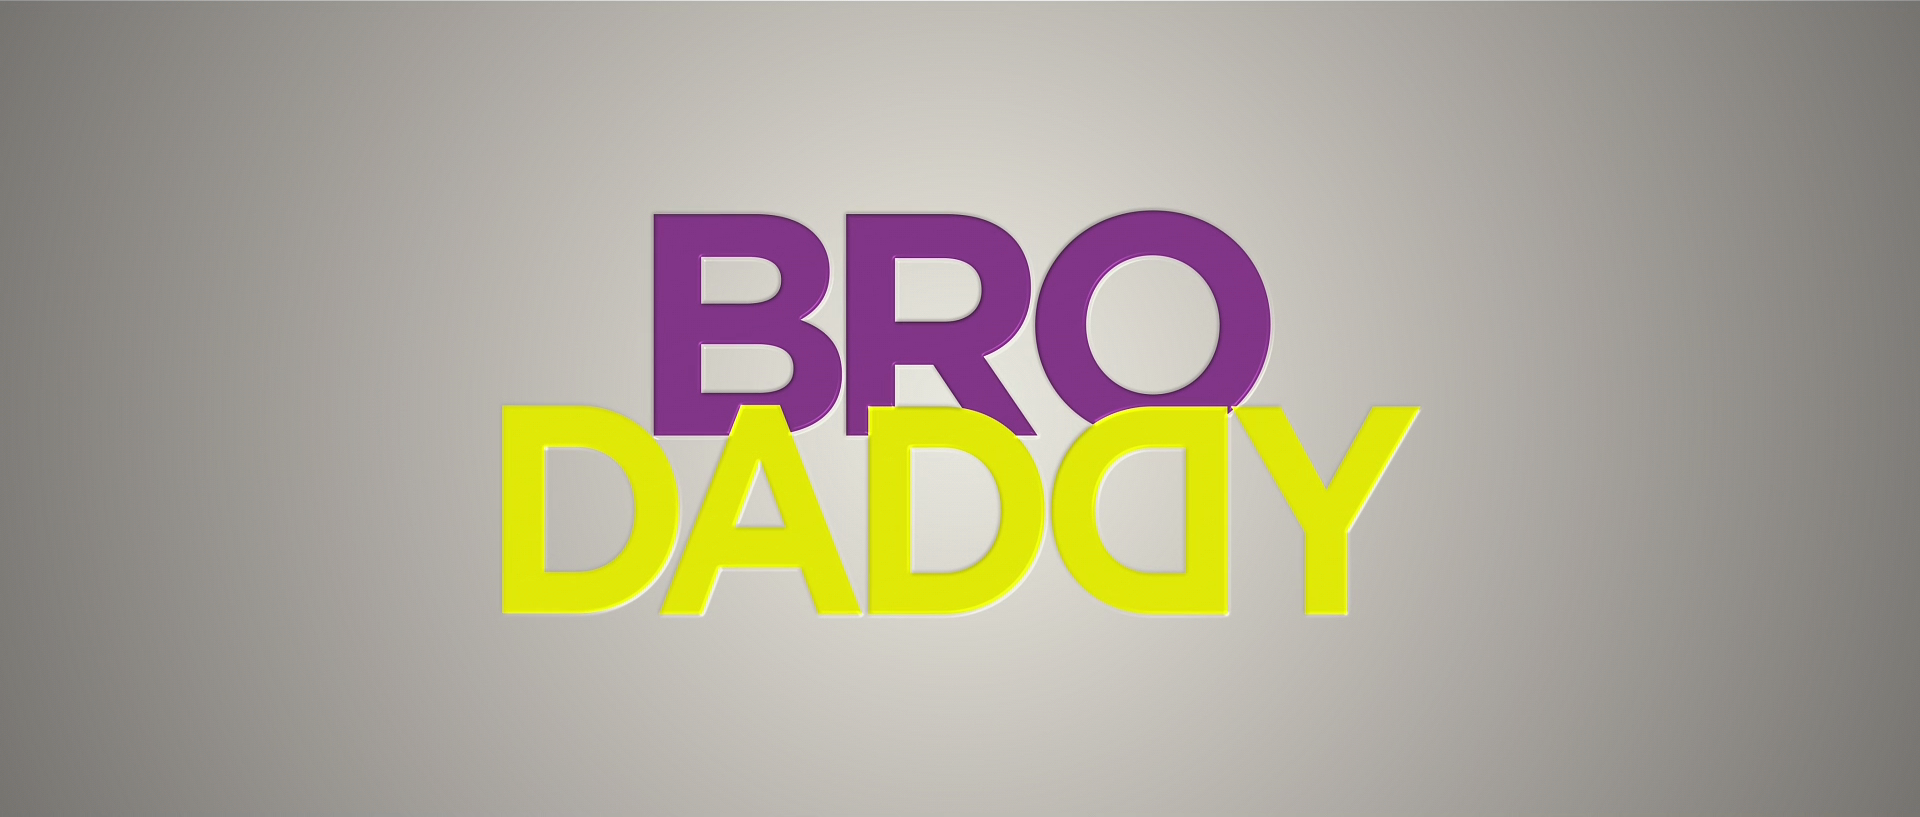 Bro Daddy (2022) Malayalam 1080p WEB-DL H264 DDP5 1-DUS Exclusive